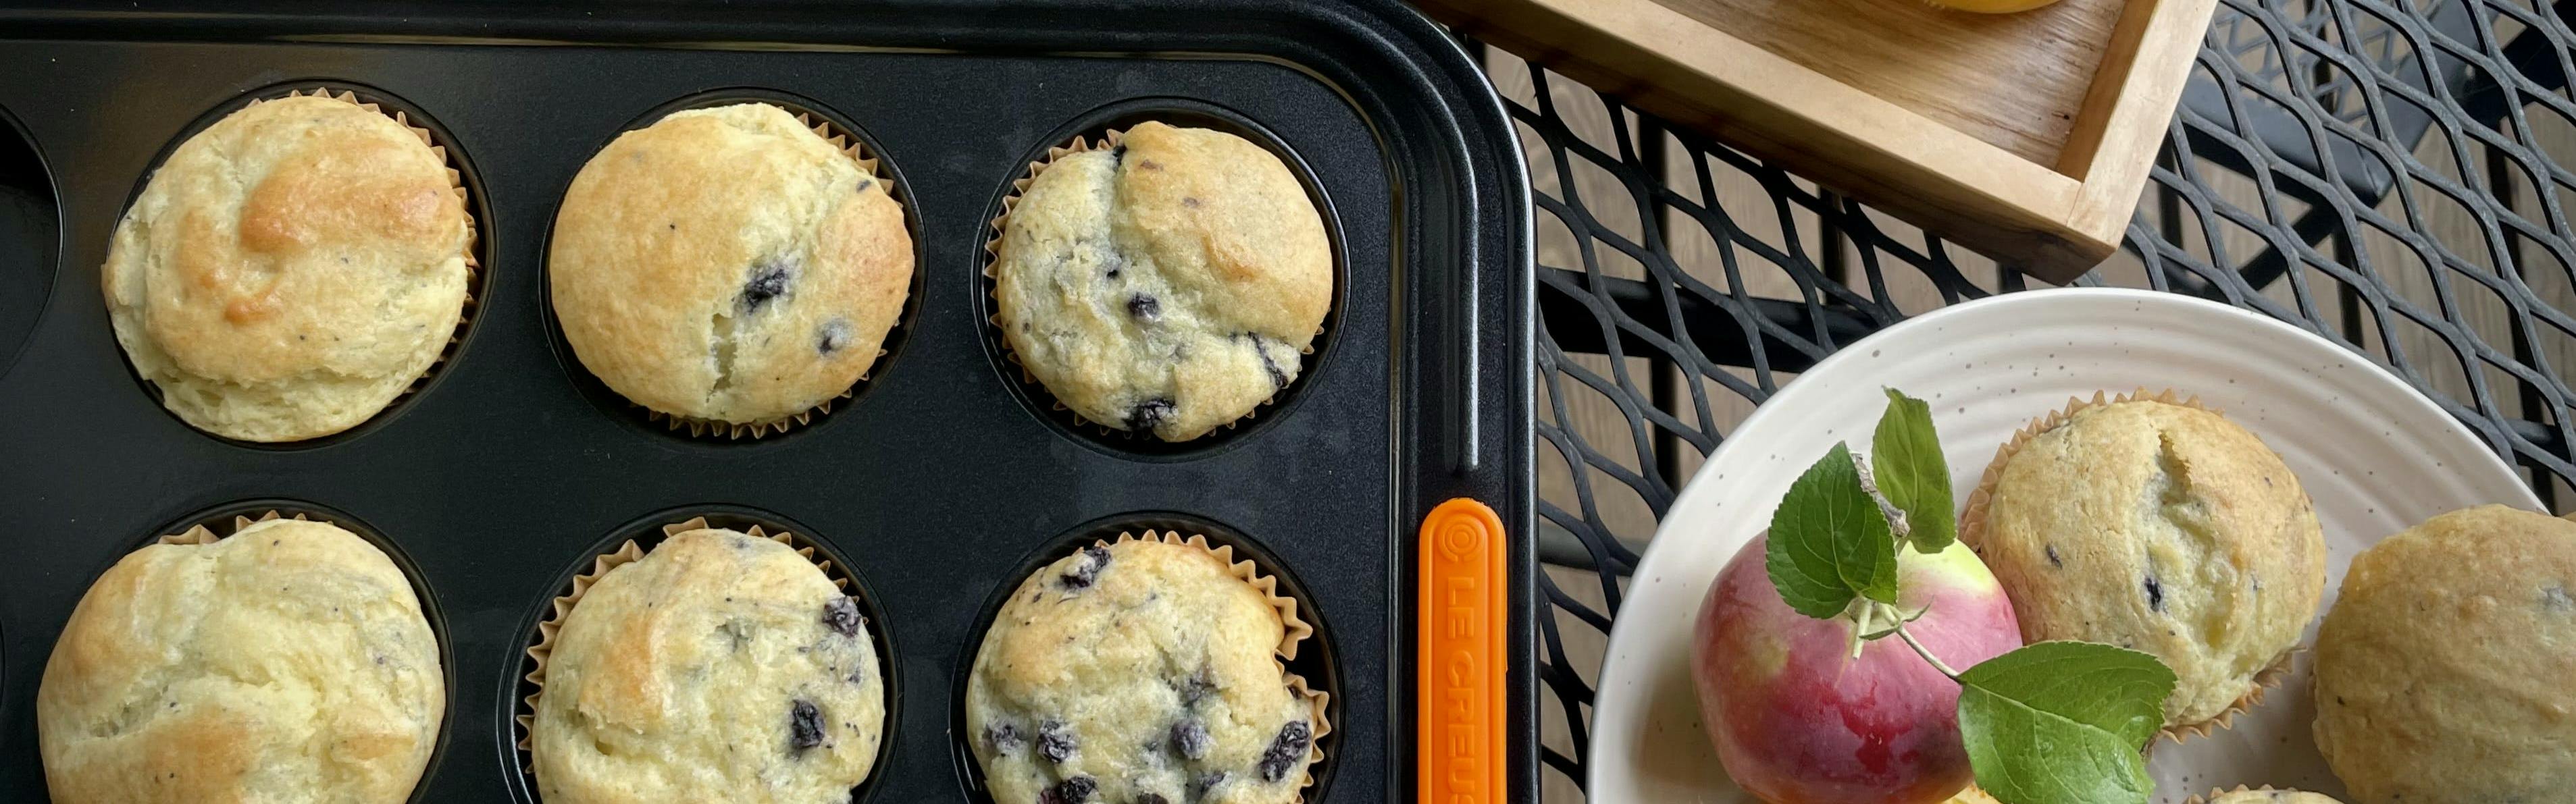 Blueberry muffins in Le Creuset nonstick muffin pan.